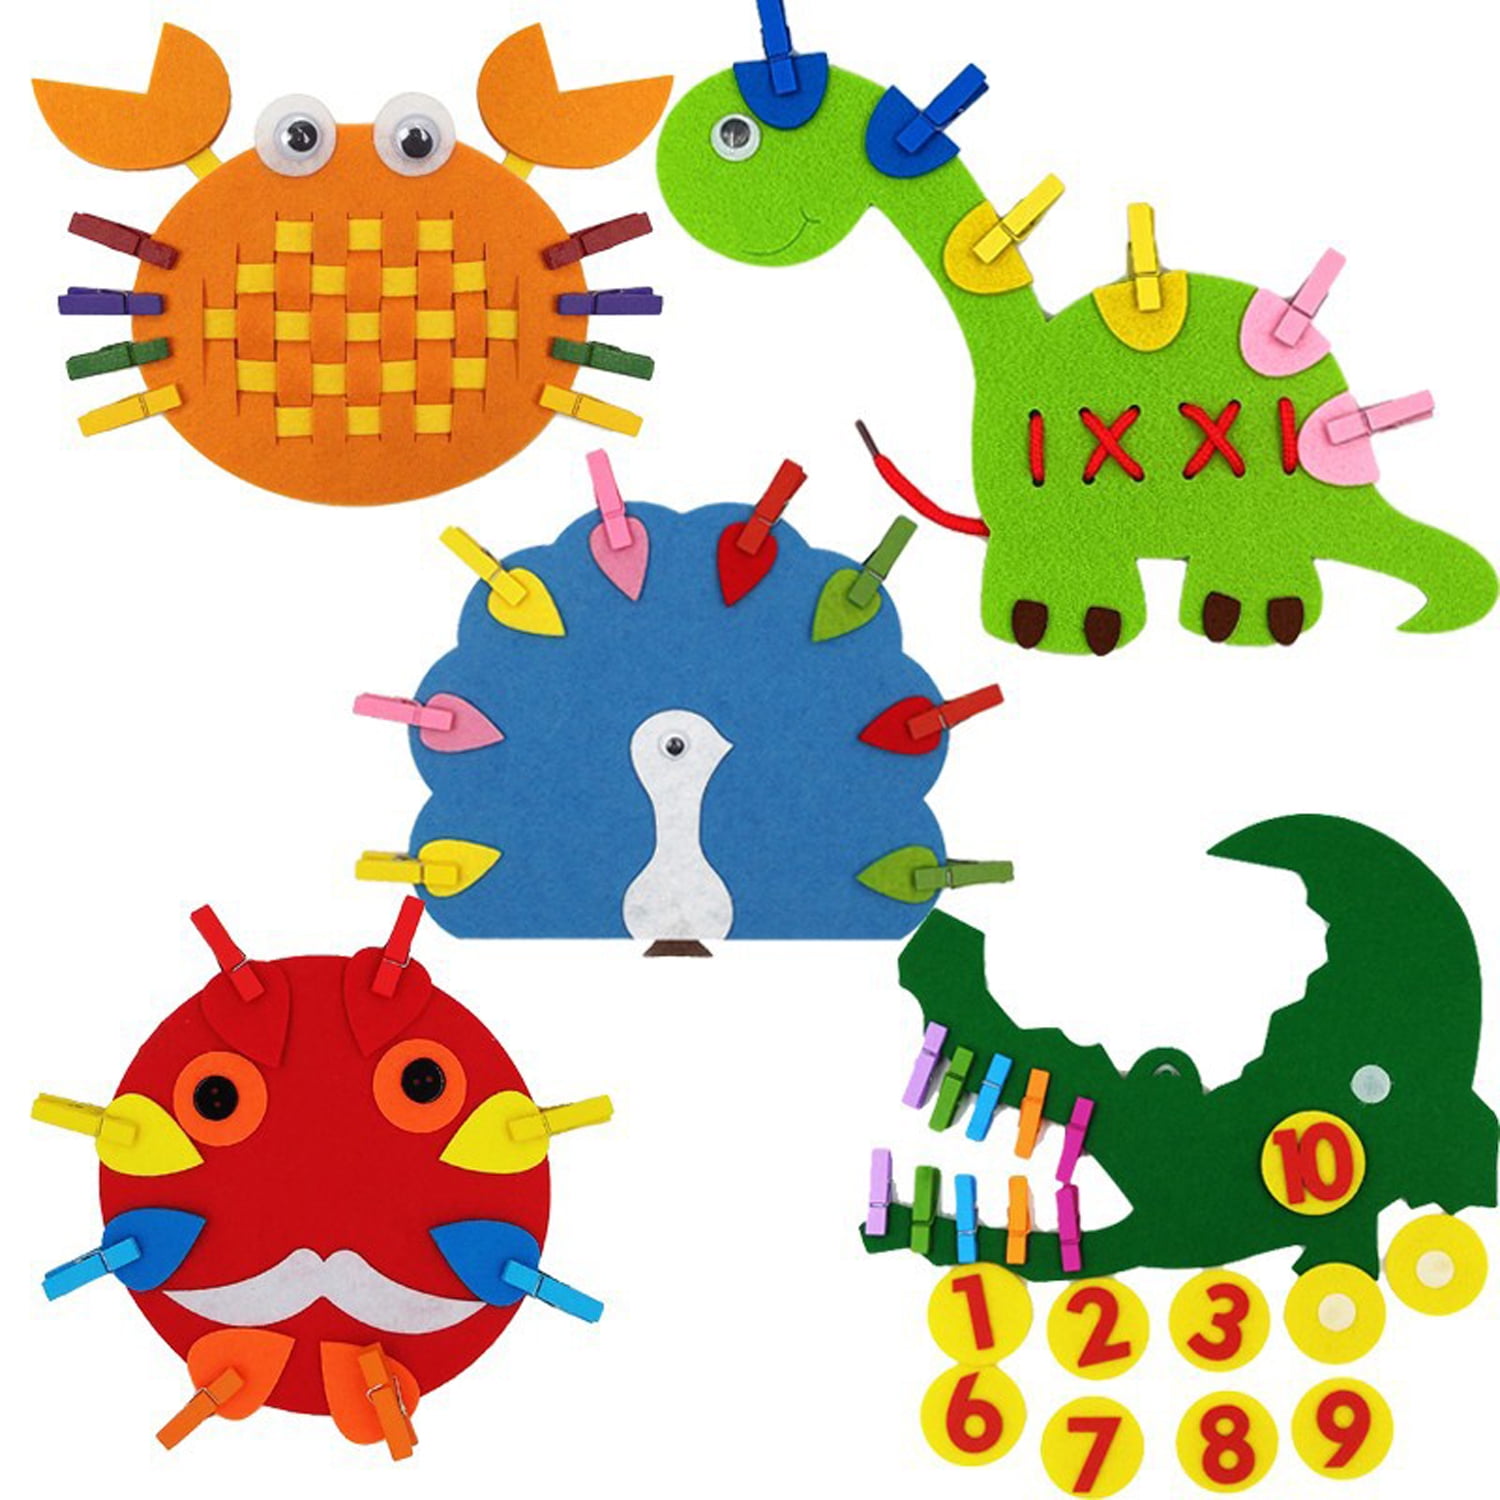 Arts and Crafts for Kids Ages 2-4 3-5, Create Your Own Animal Crafts Using Cups, Art Project Kits for Preschoolers, DIY Children Activities for Boys